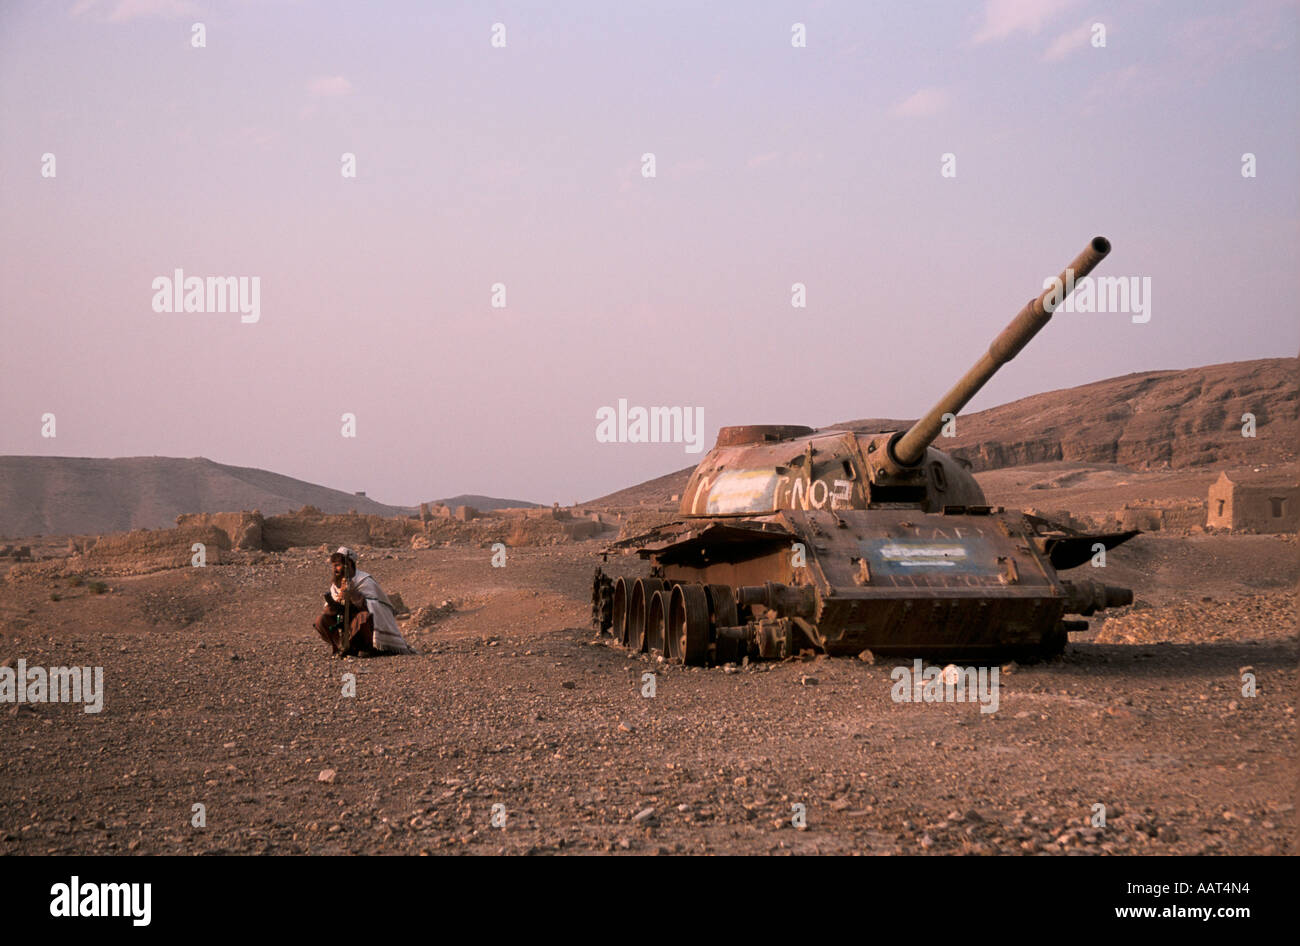 REBIRTH OF A NATION A RUSSIAN T 62 TANK A RELIC FROM THE WAR LIES REDUNDANT ON THE ROAD FROM PAKISTAN TO JALALABAD 2001 Stock Photo